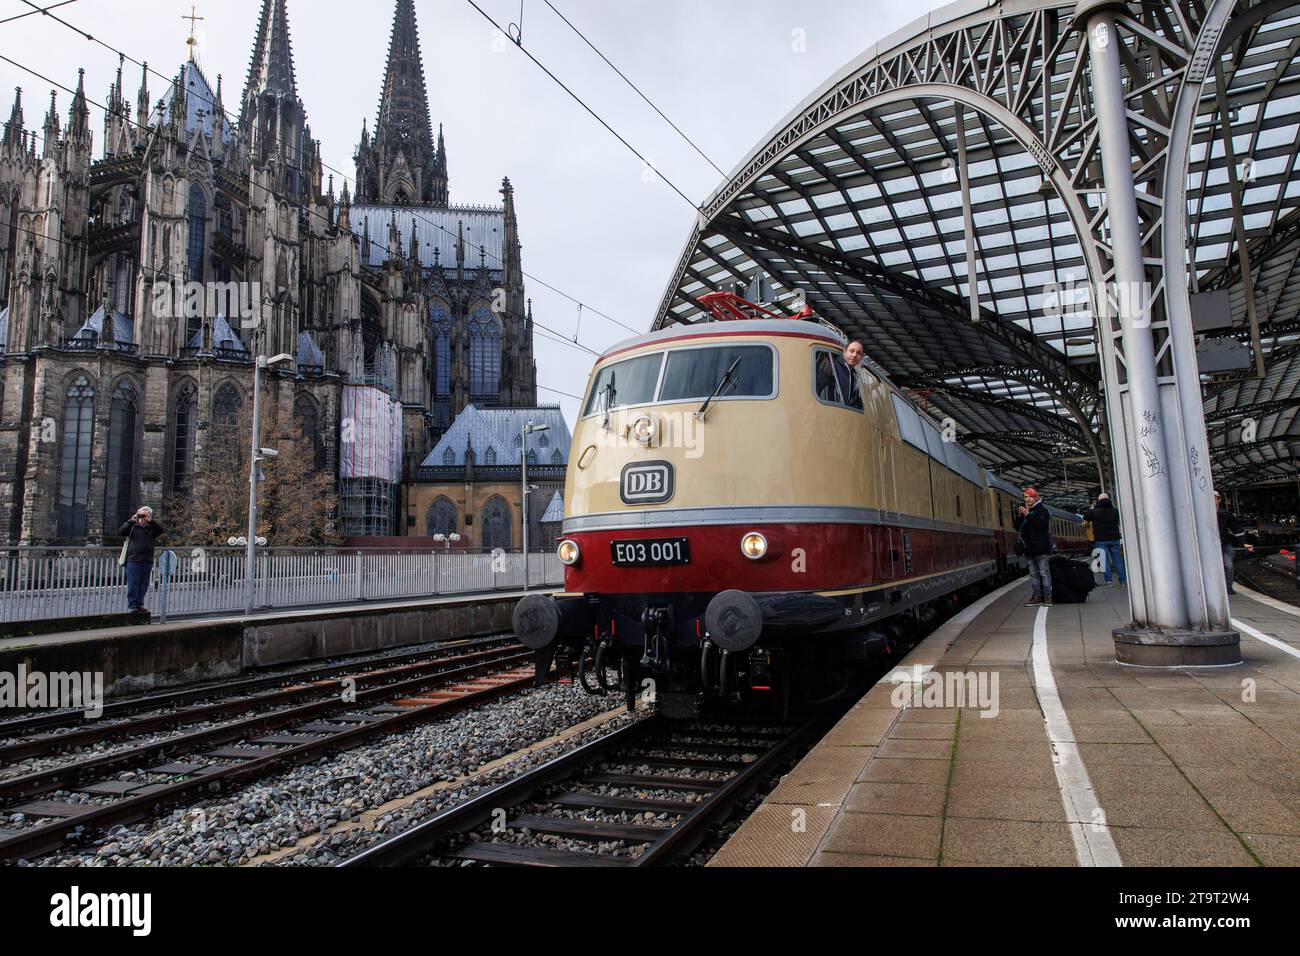 locomotive E03 001 of the historical Rheingold train leaving the main station, Cologne cathedral, Cologne, Germany. Lokomotive E03 001 des historische Stock Photo